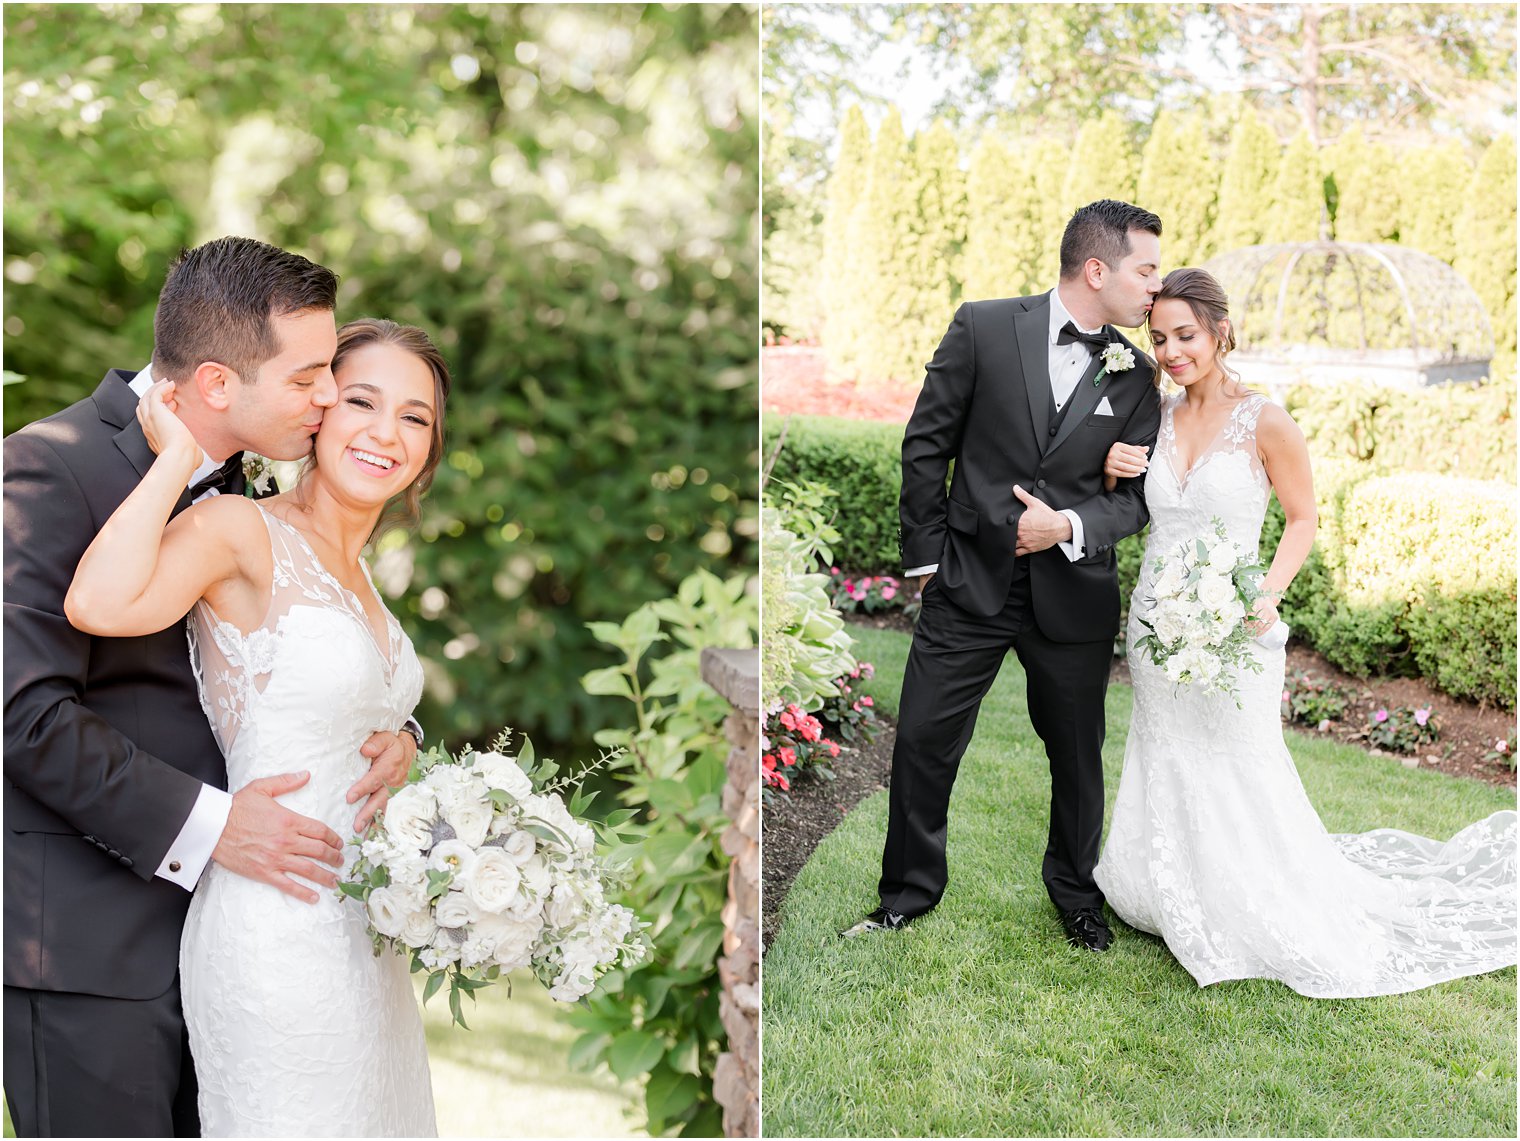 bride and groom laugh together in gardens at Park Savoy Estate